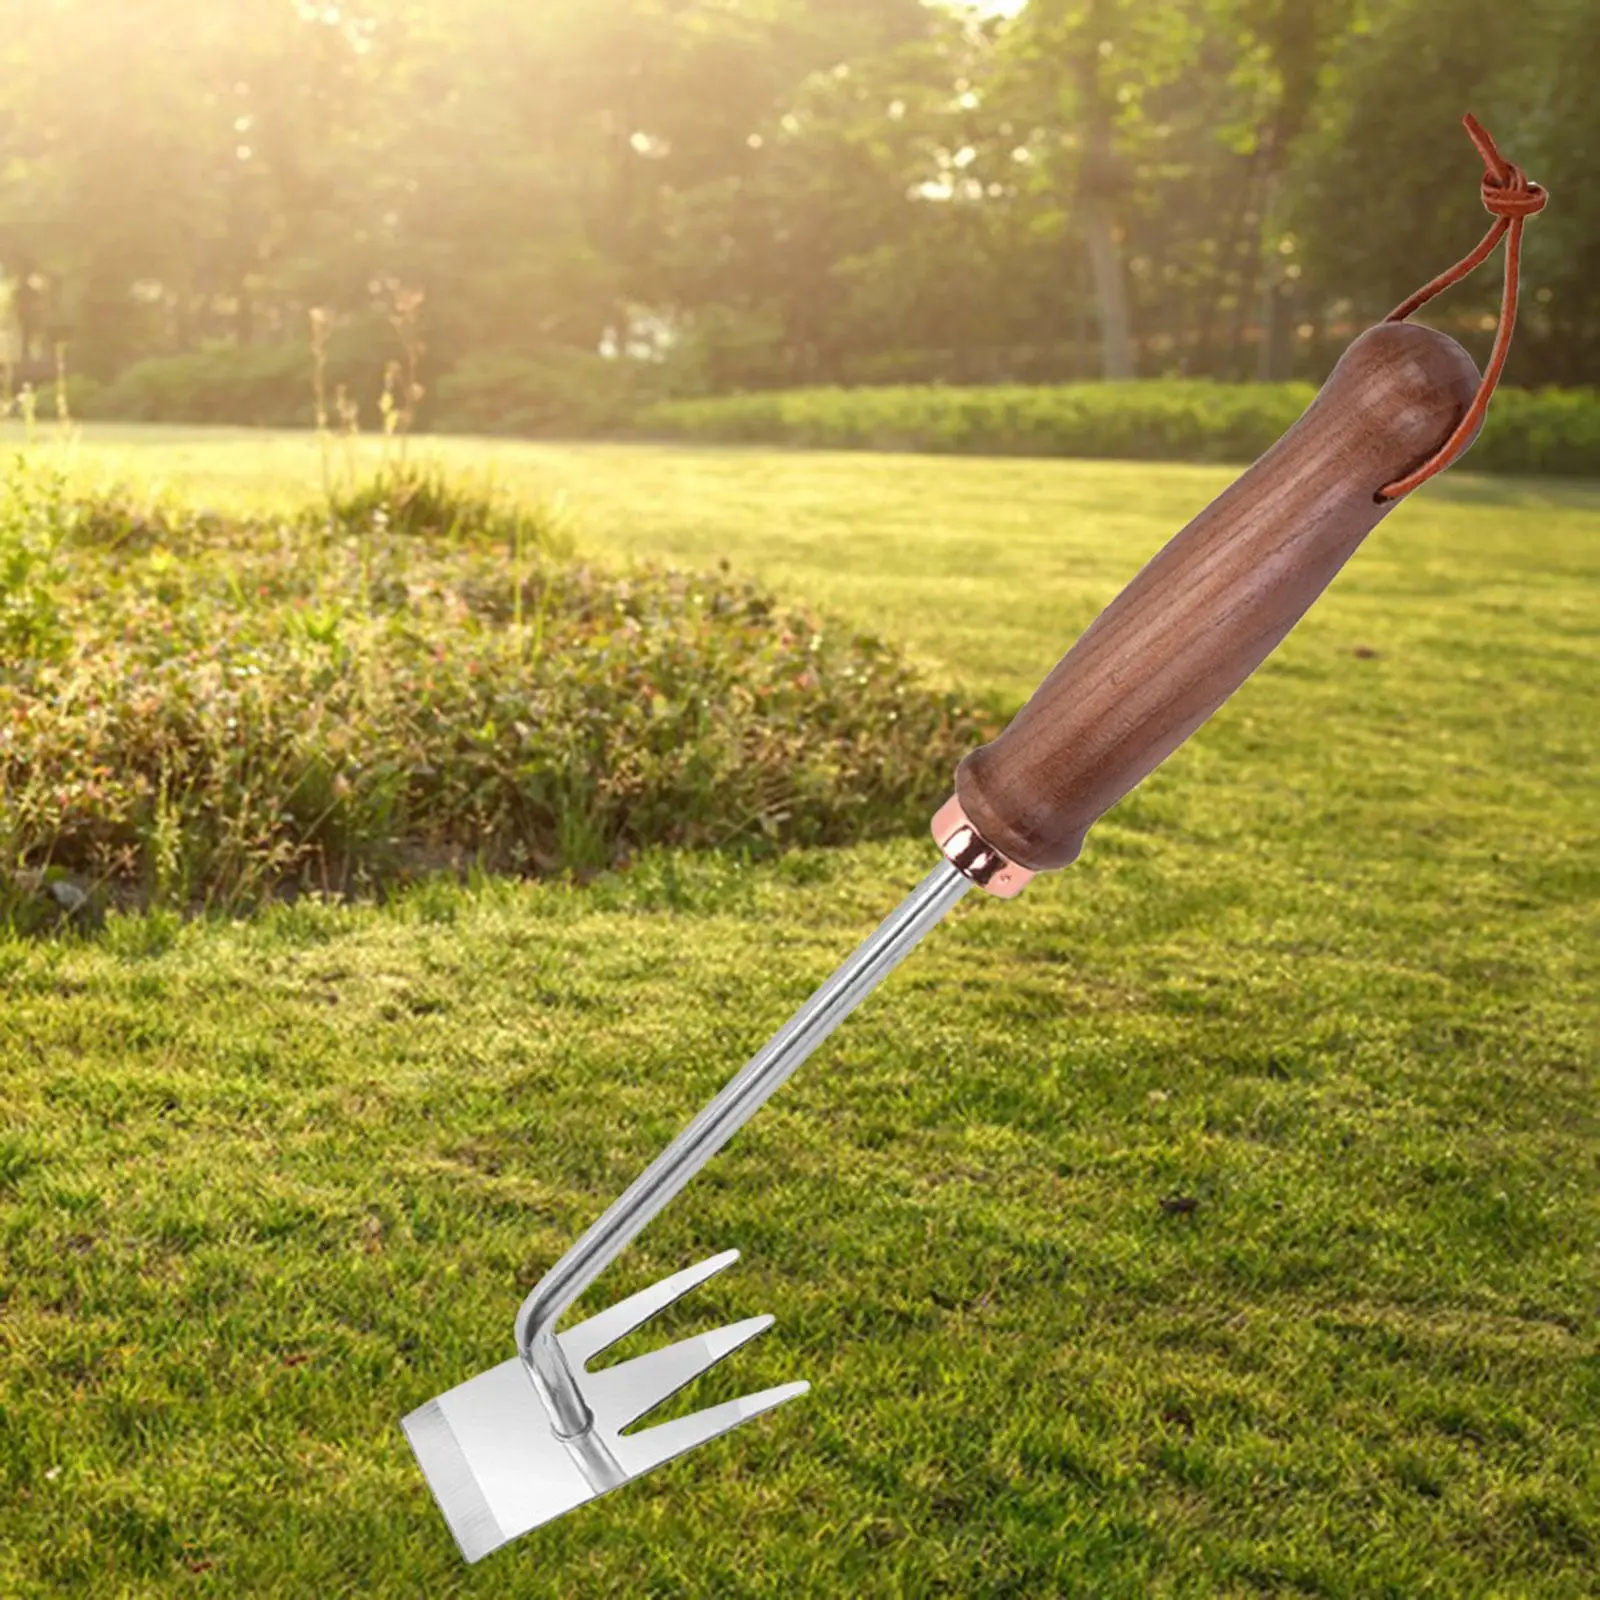 Hand Weeding Removal Agricultural Cultivator Ergonomic Handle Garden Weeder Tool for Planting Lawn Backyard Gardening Loosening